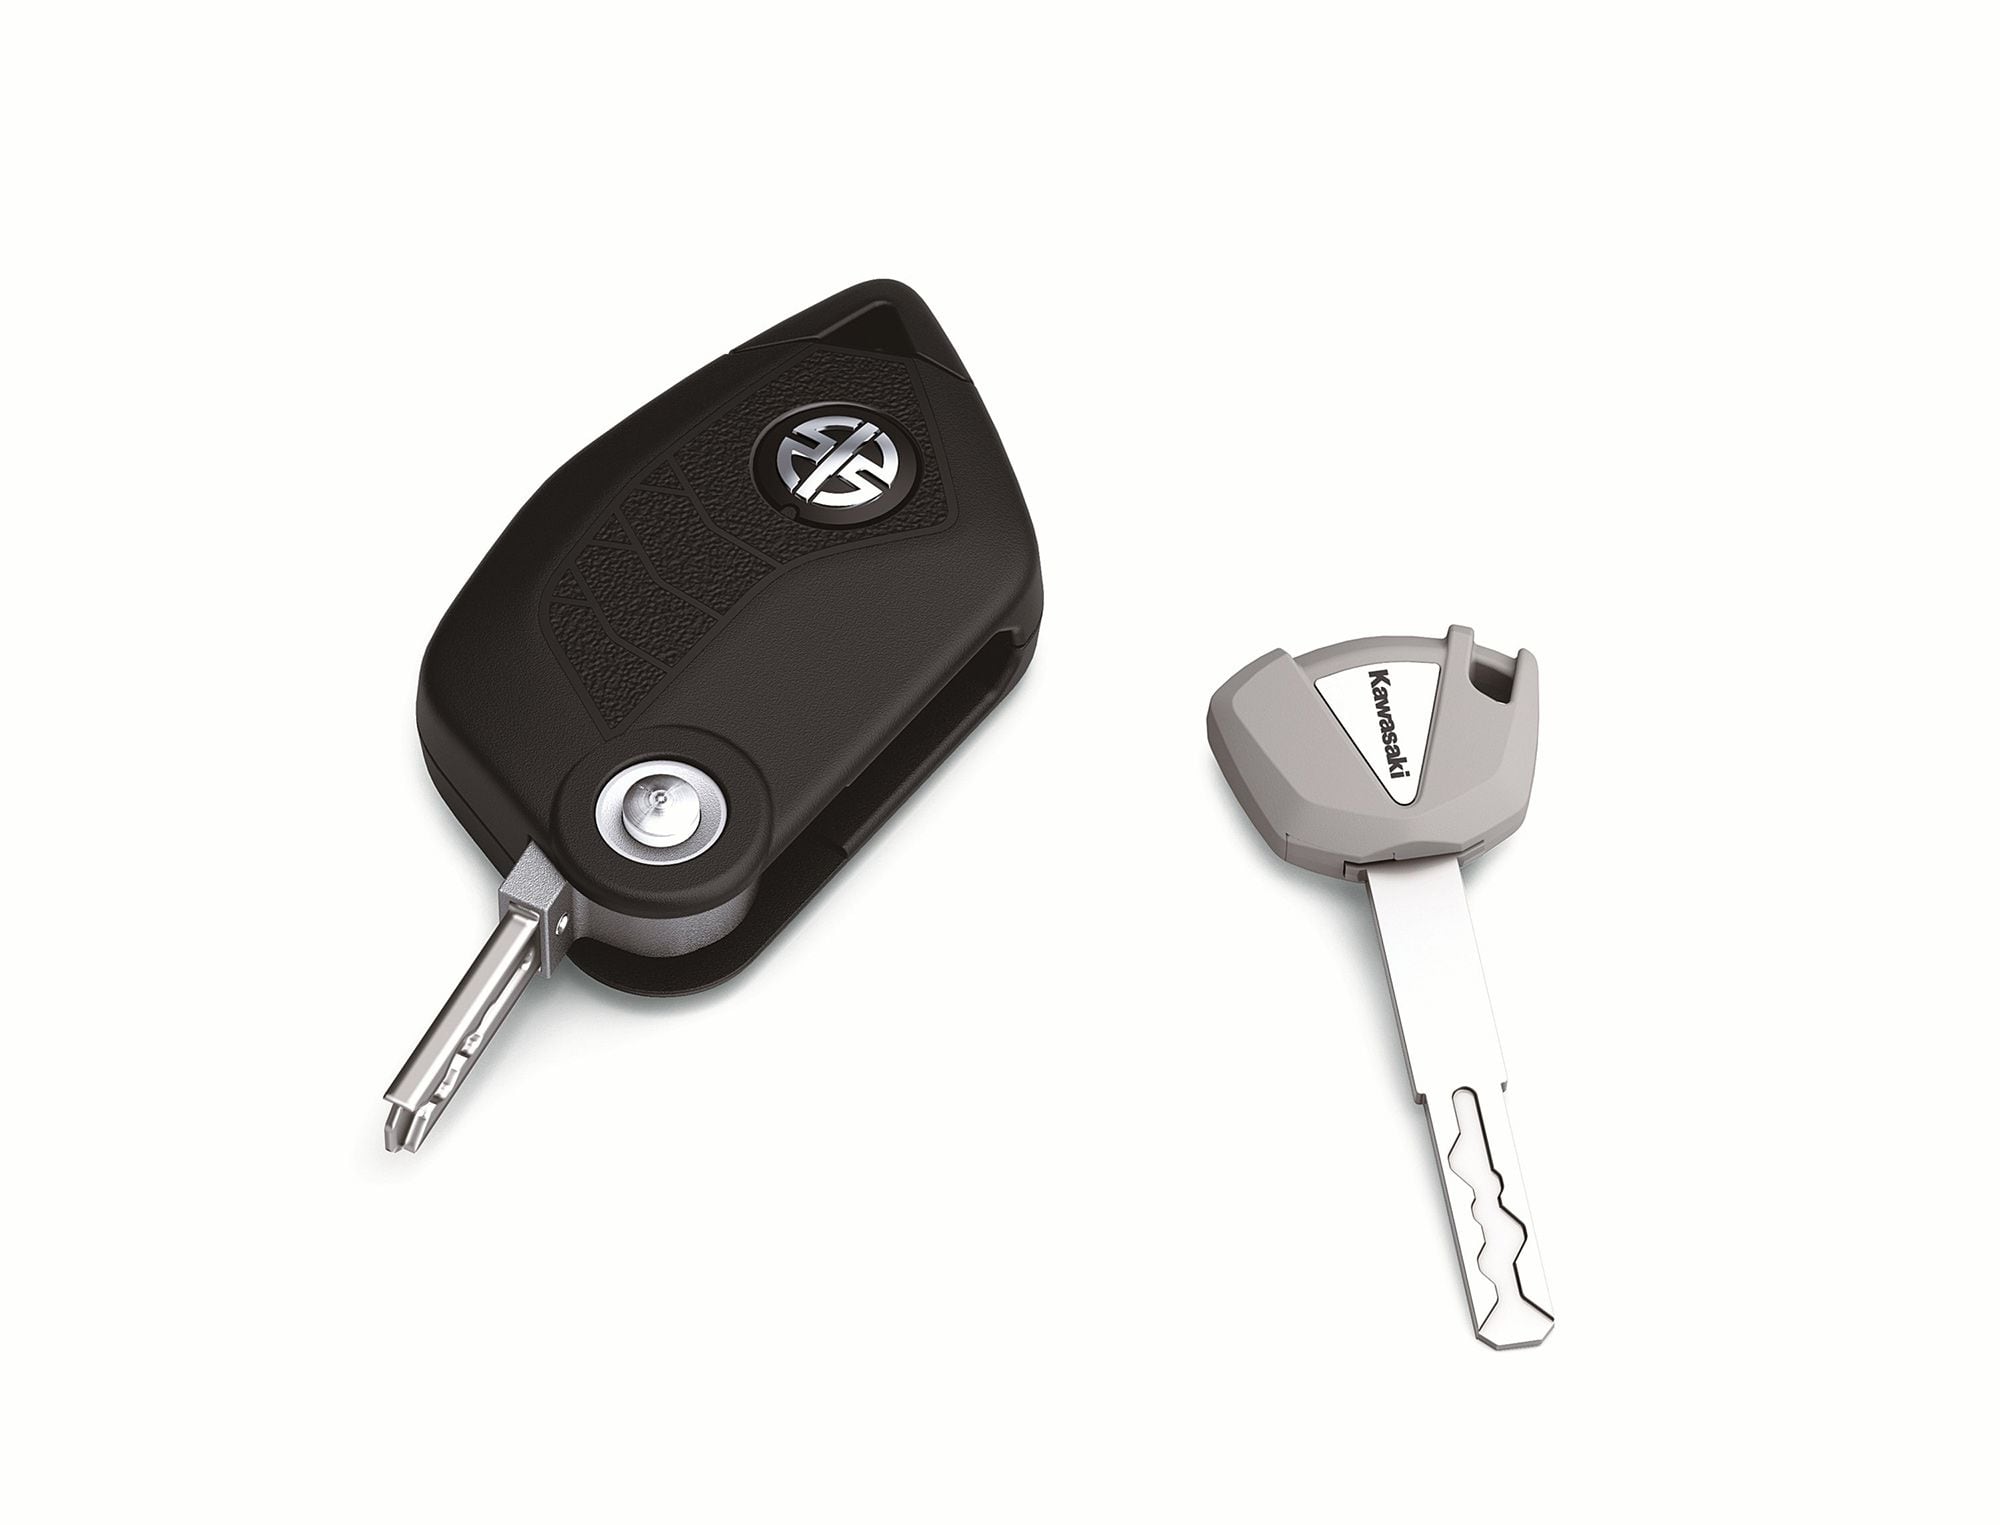 A new KIPASS system allows remote starting when the key fob is in range.